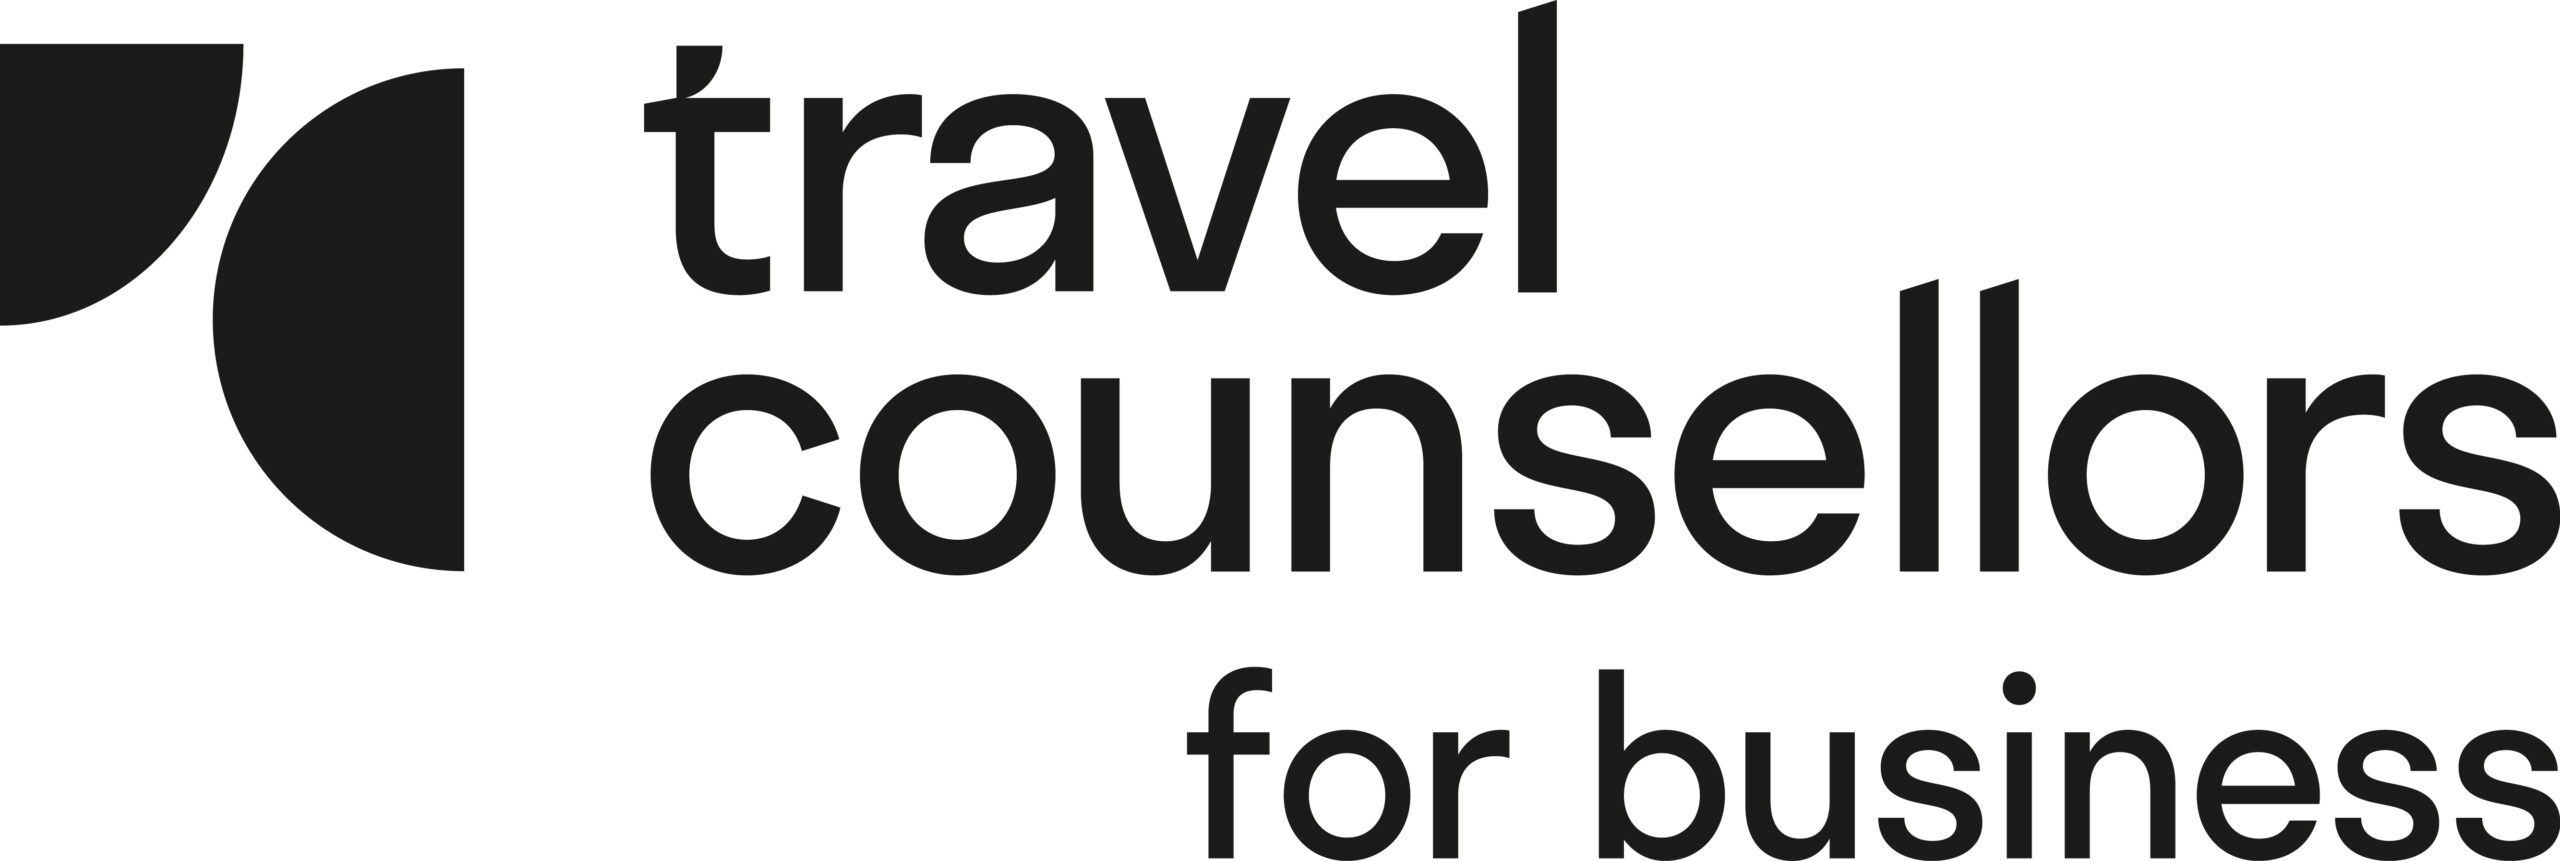 Why choose Travel Counsellors for Business?  PA Life [Video]